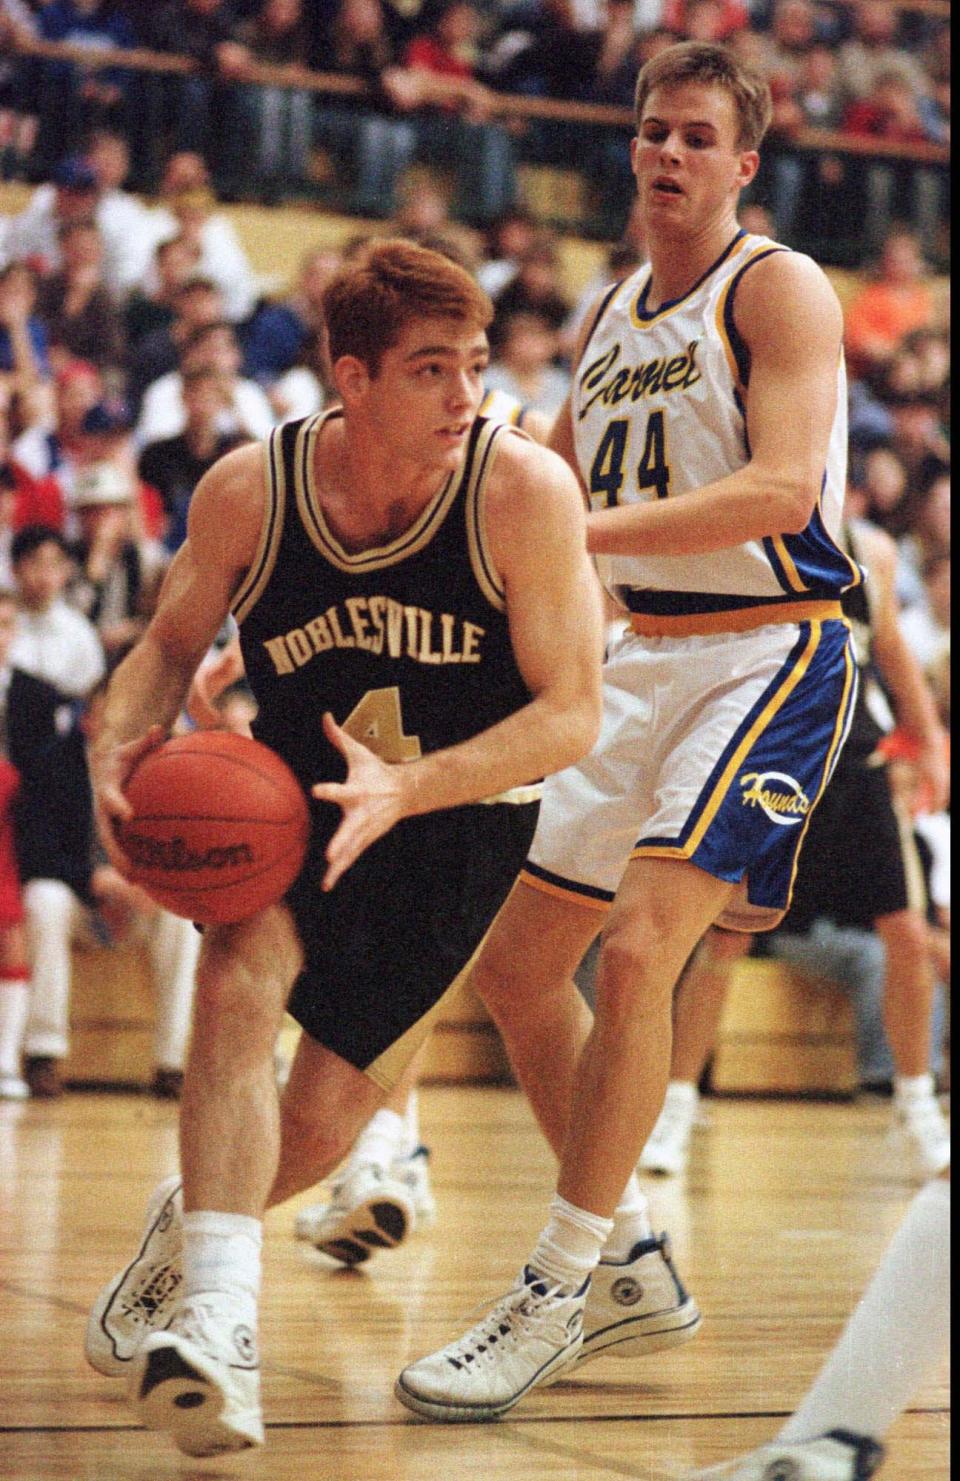 Noblesville's Tom Coverdale drives around Carmel defender Matt Abernethy during first half action at the Noblesville sectional in 1997.